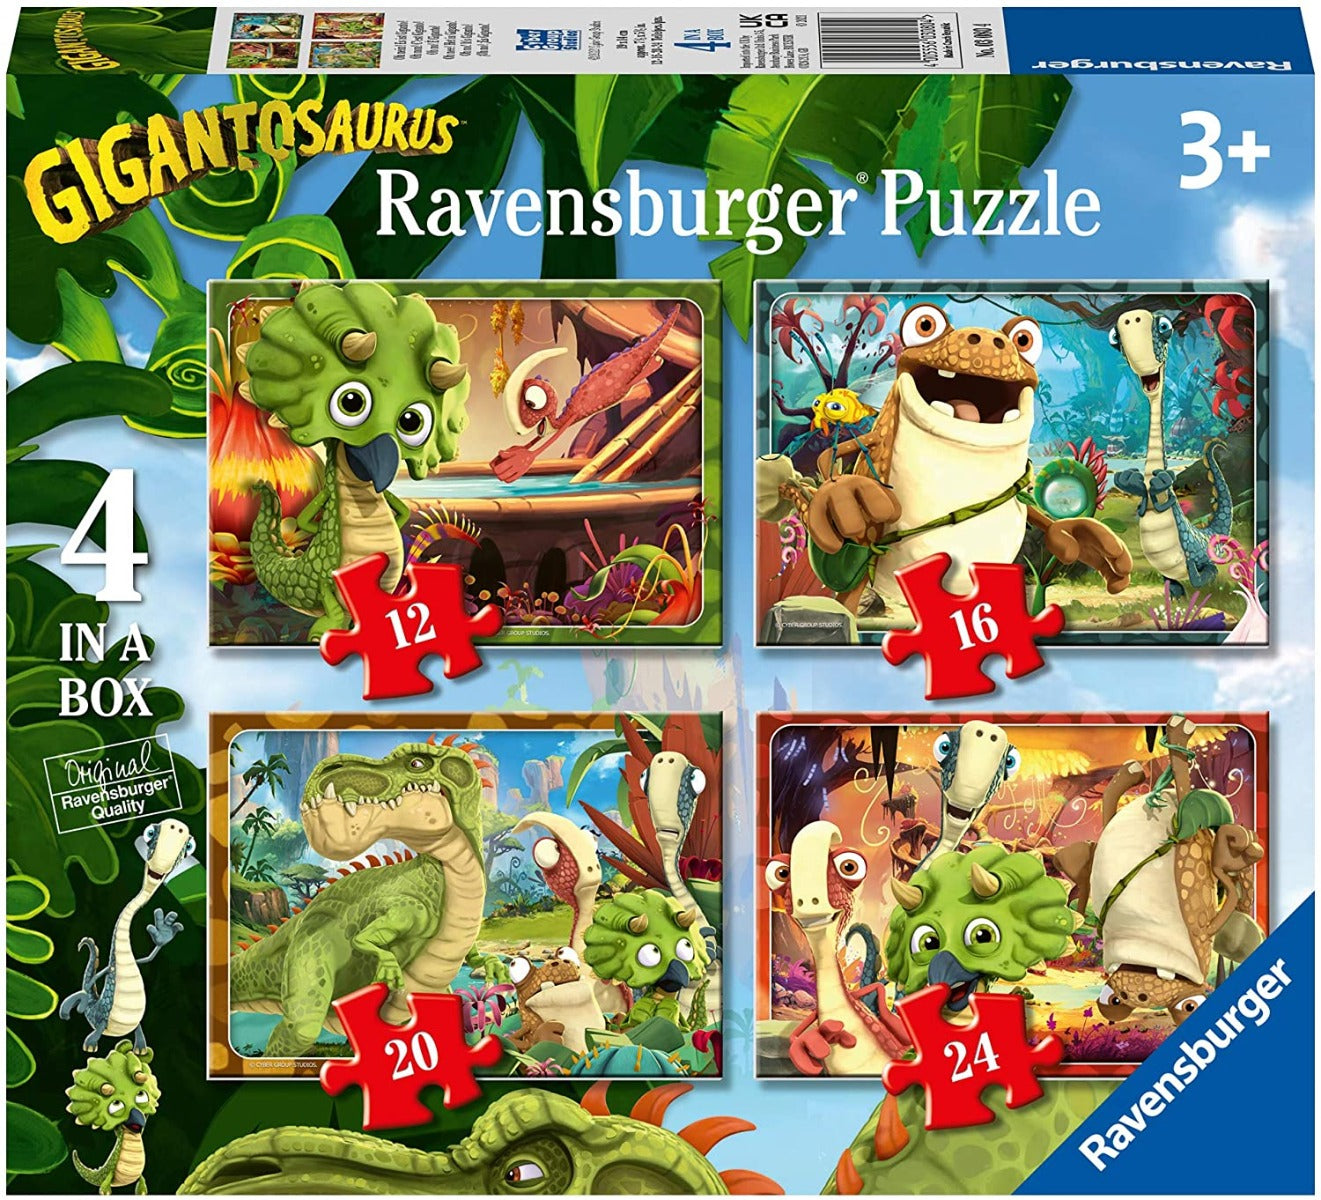 Ravensburger - Gigantosaurus 4 in a Box -  12, 16, 20 and 24 Piece Jigsaw Puzzles